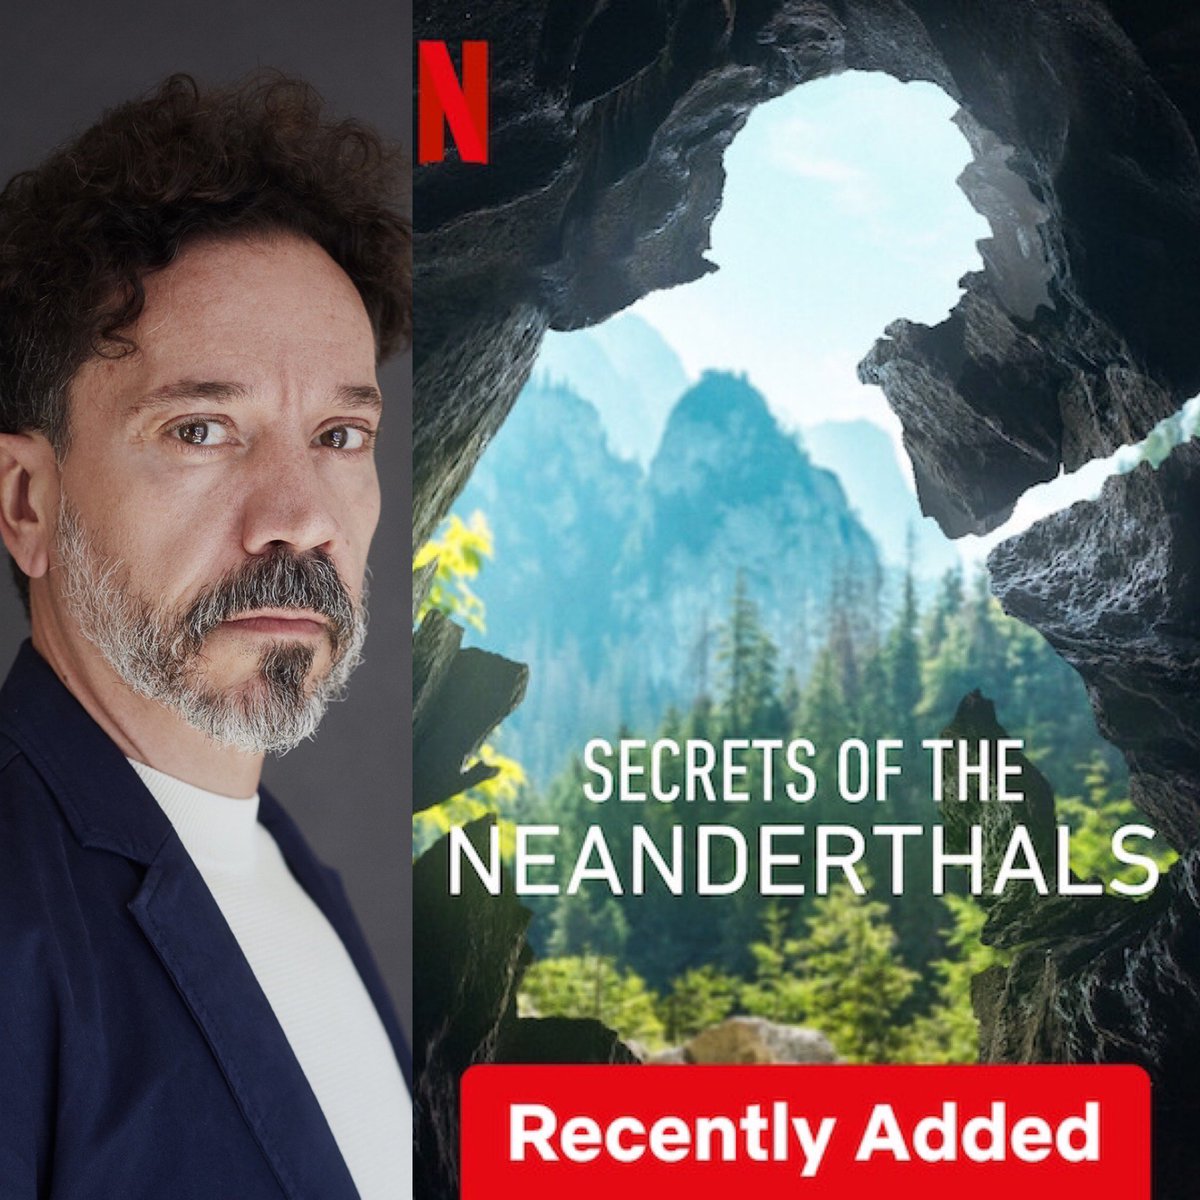 Our client, GABRIEL ANDREU stars in the Docudrama SECRETS OF THE NEANDERTHALS, narrated by Patrick Stewart is now available to watch on Netflix.